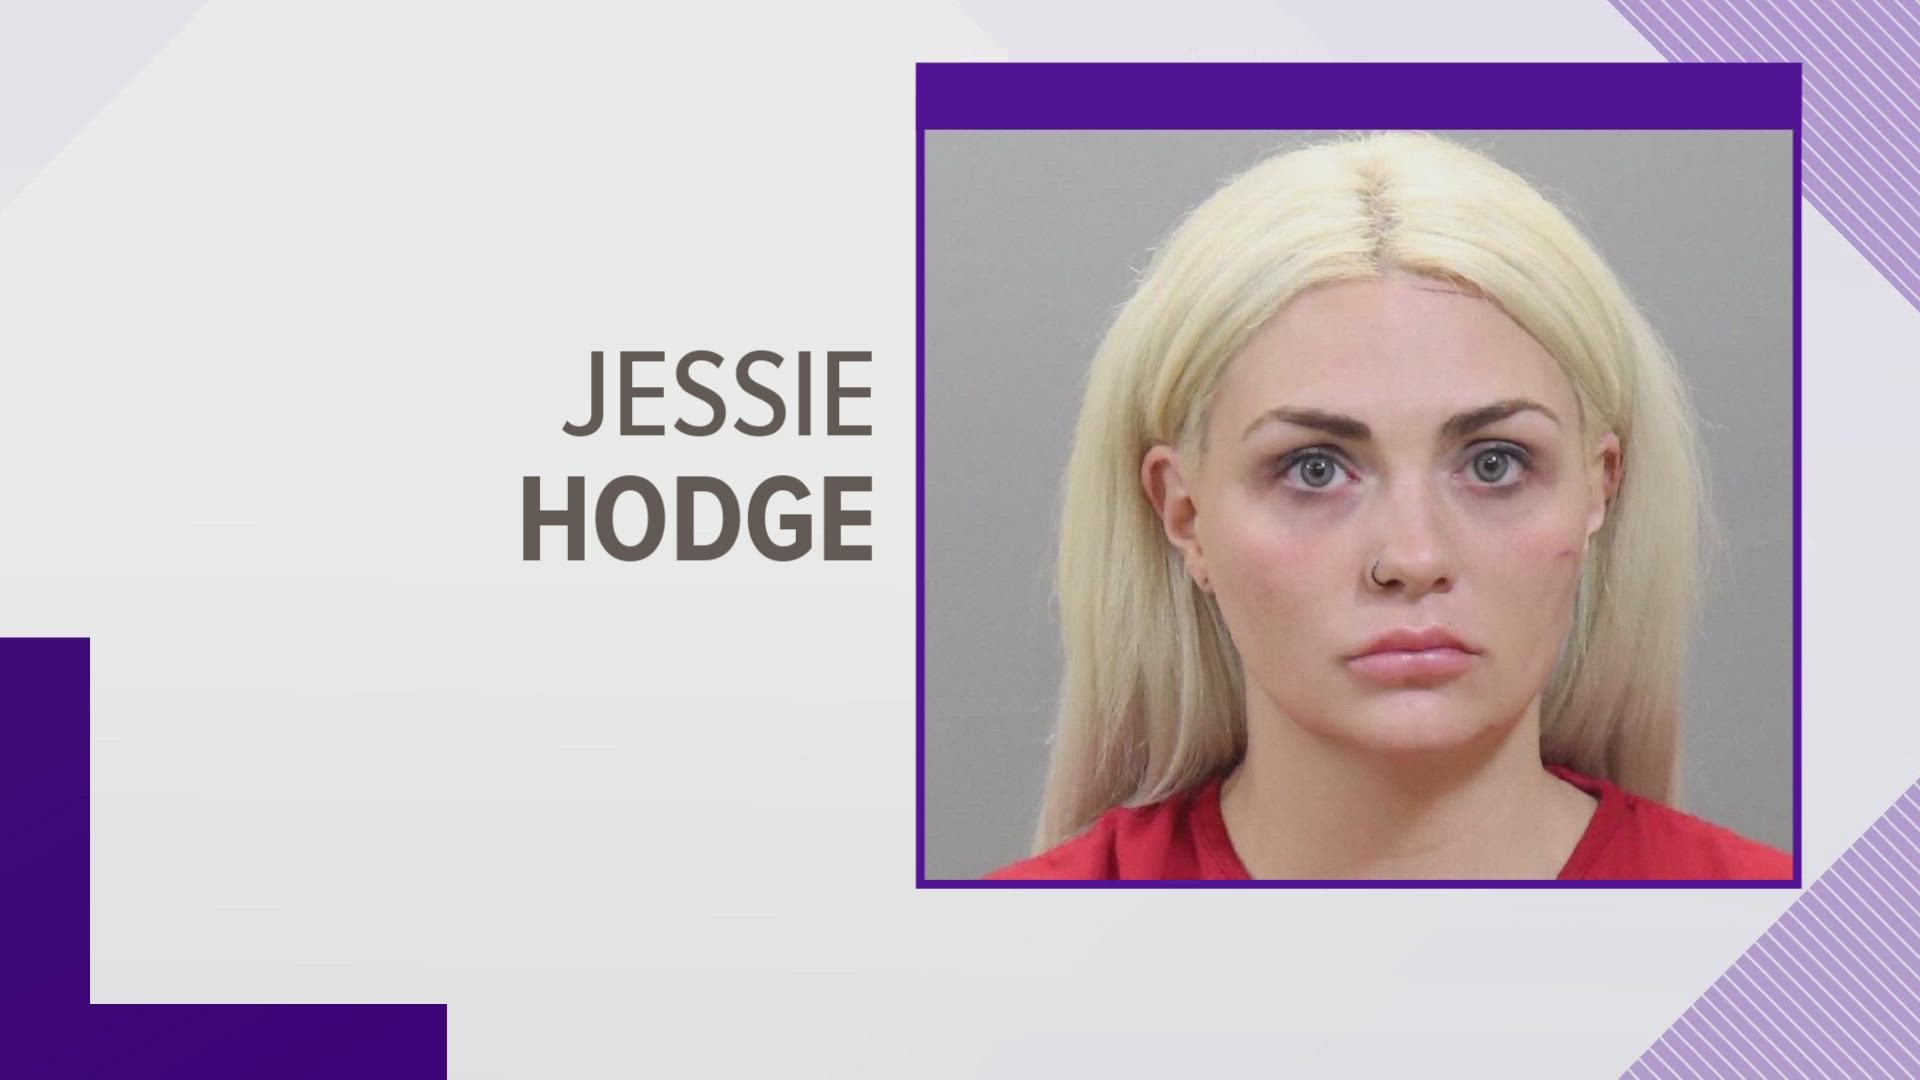 Jessie Hodge, 31, is alleged to have killed Dwight Woods last year.